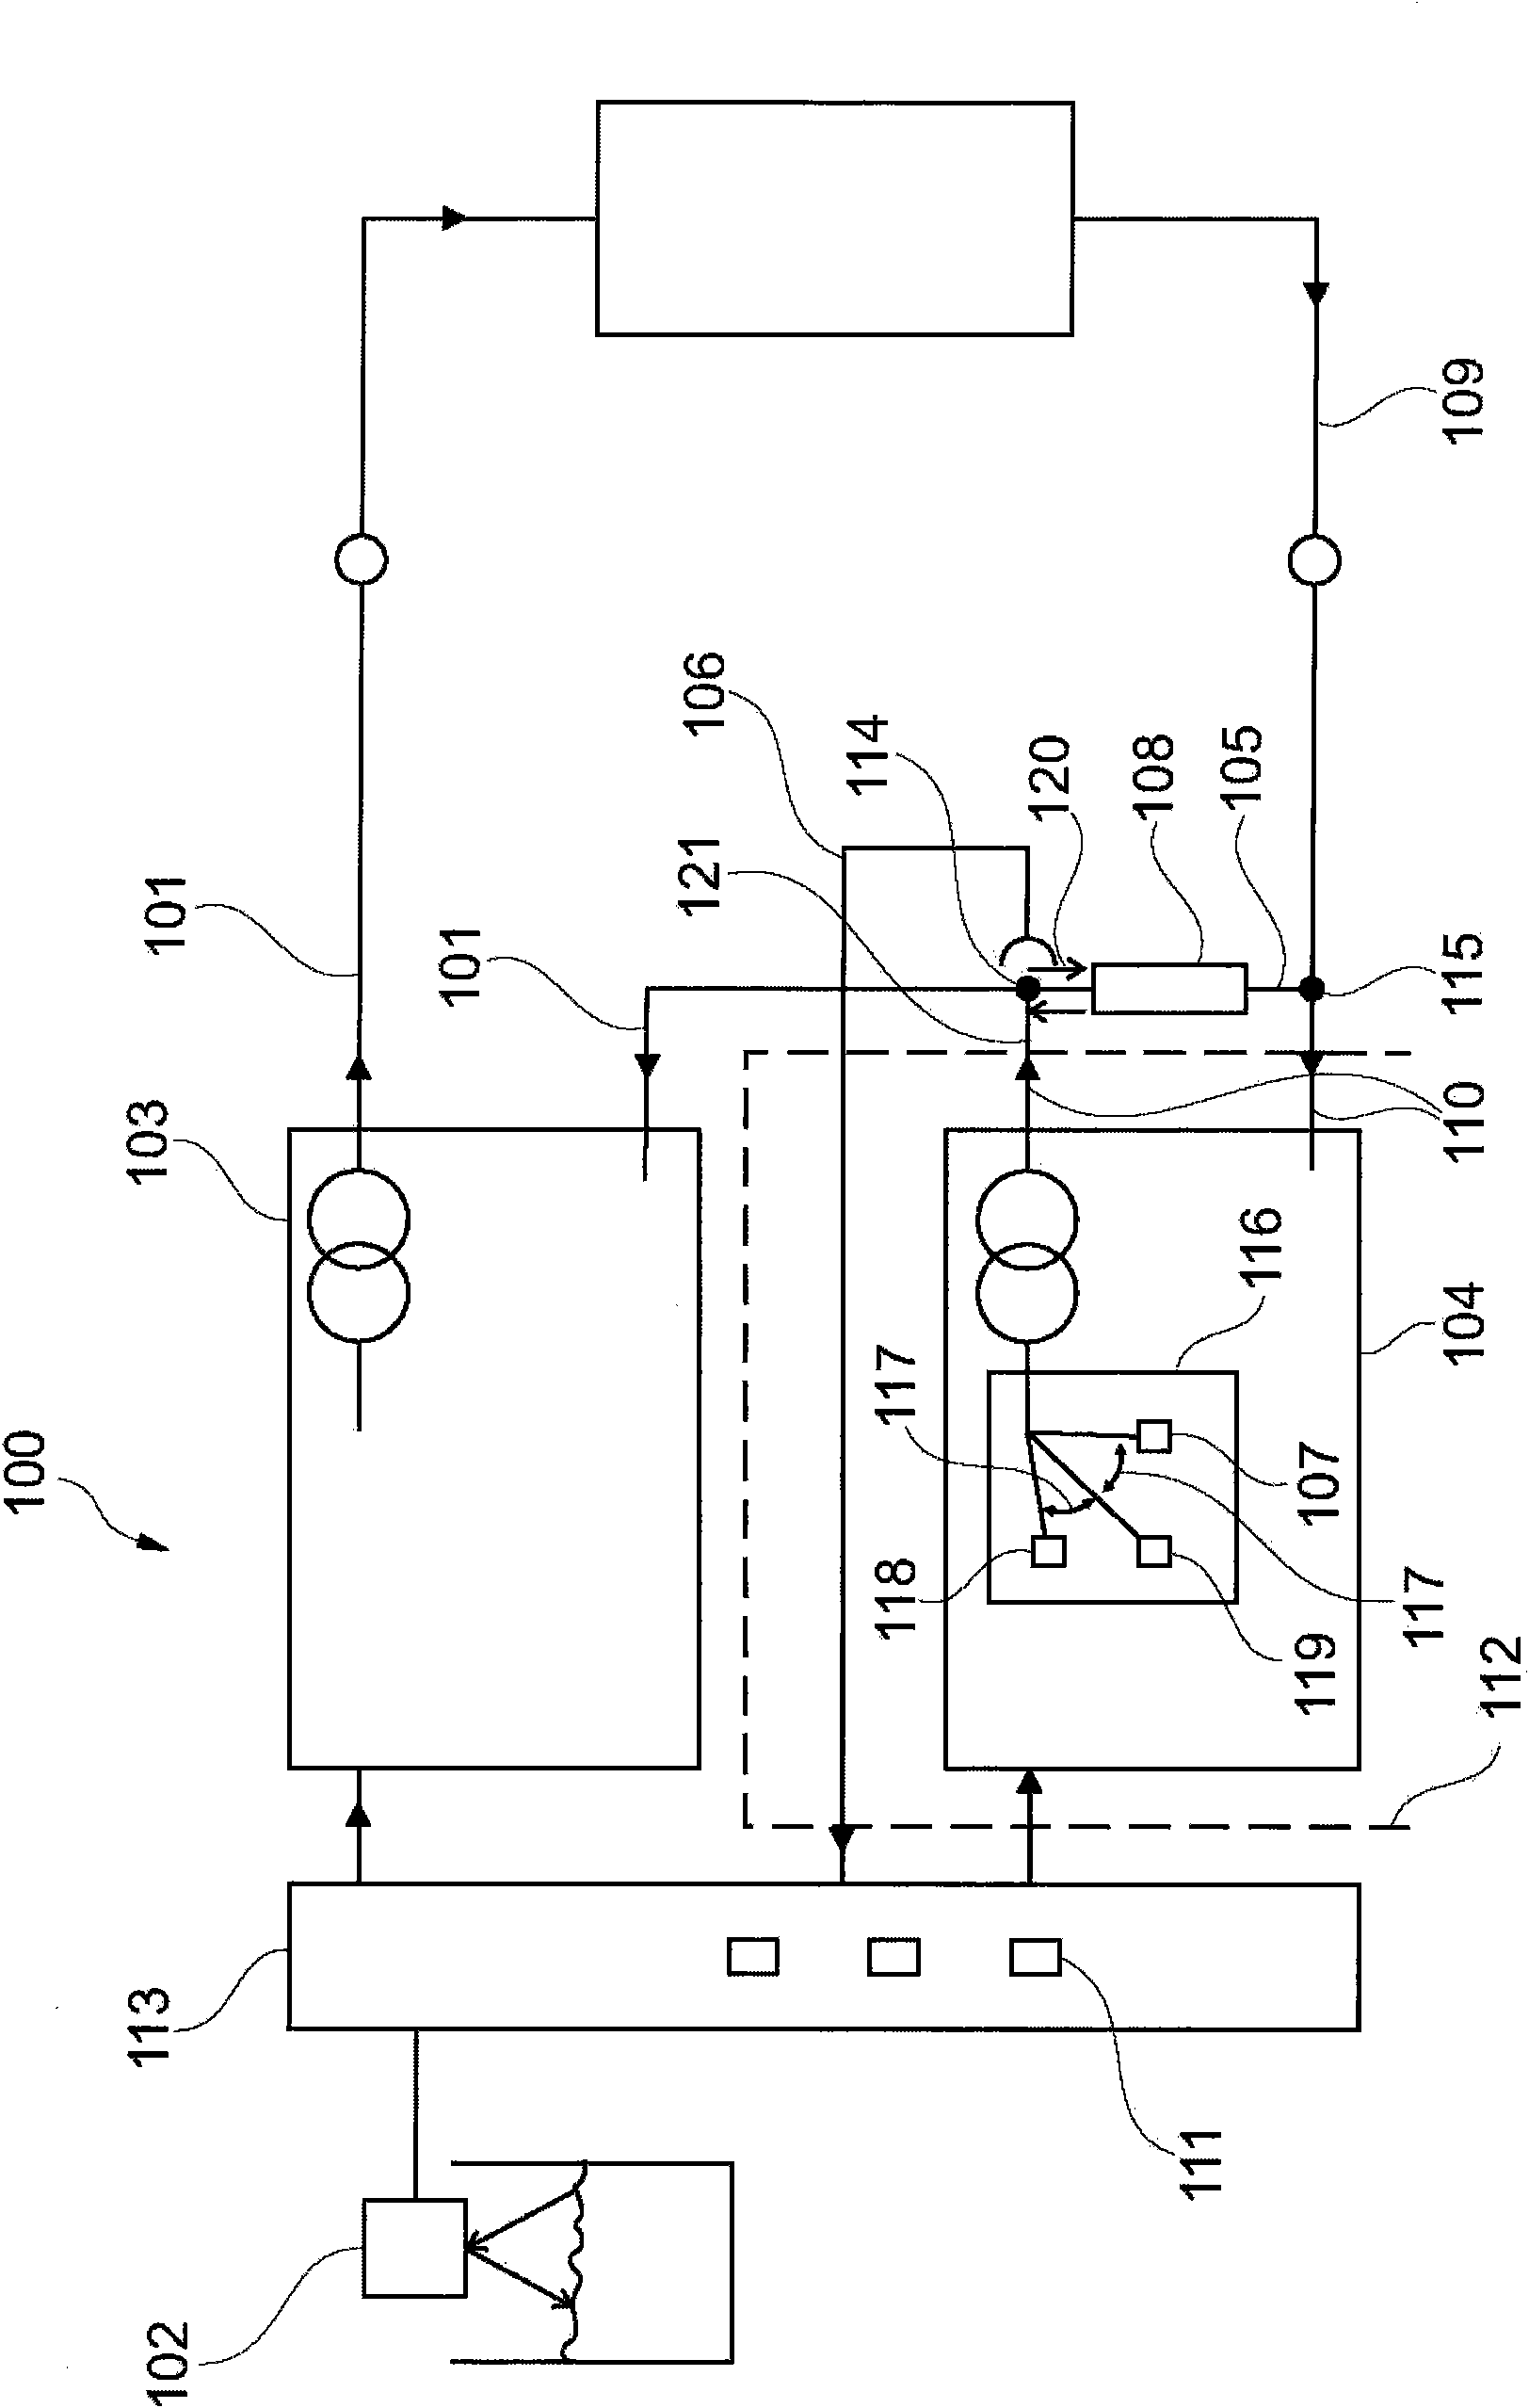 Current production equipment for generating and monitoring and measuring the electric current